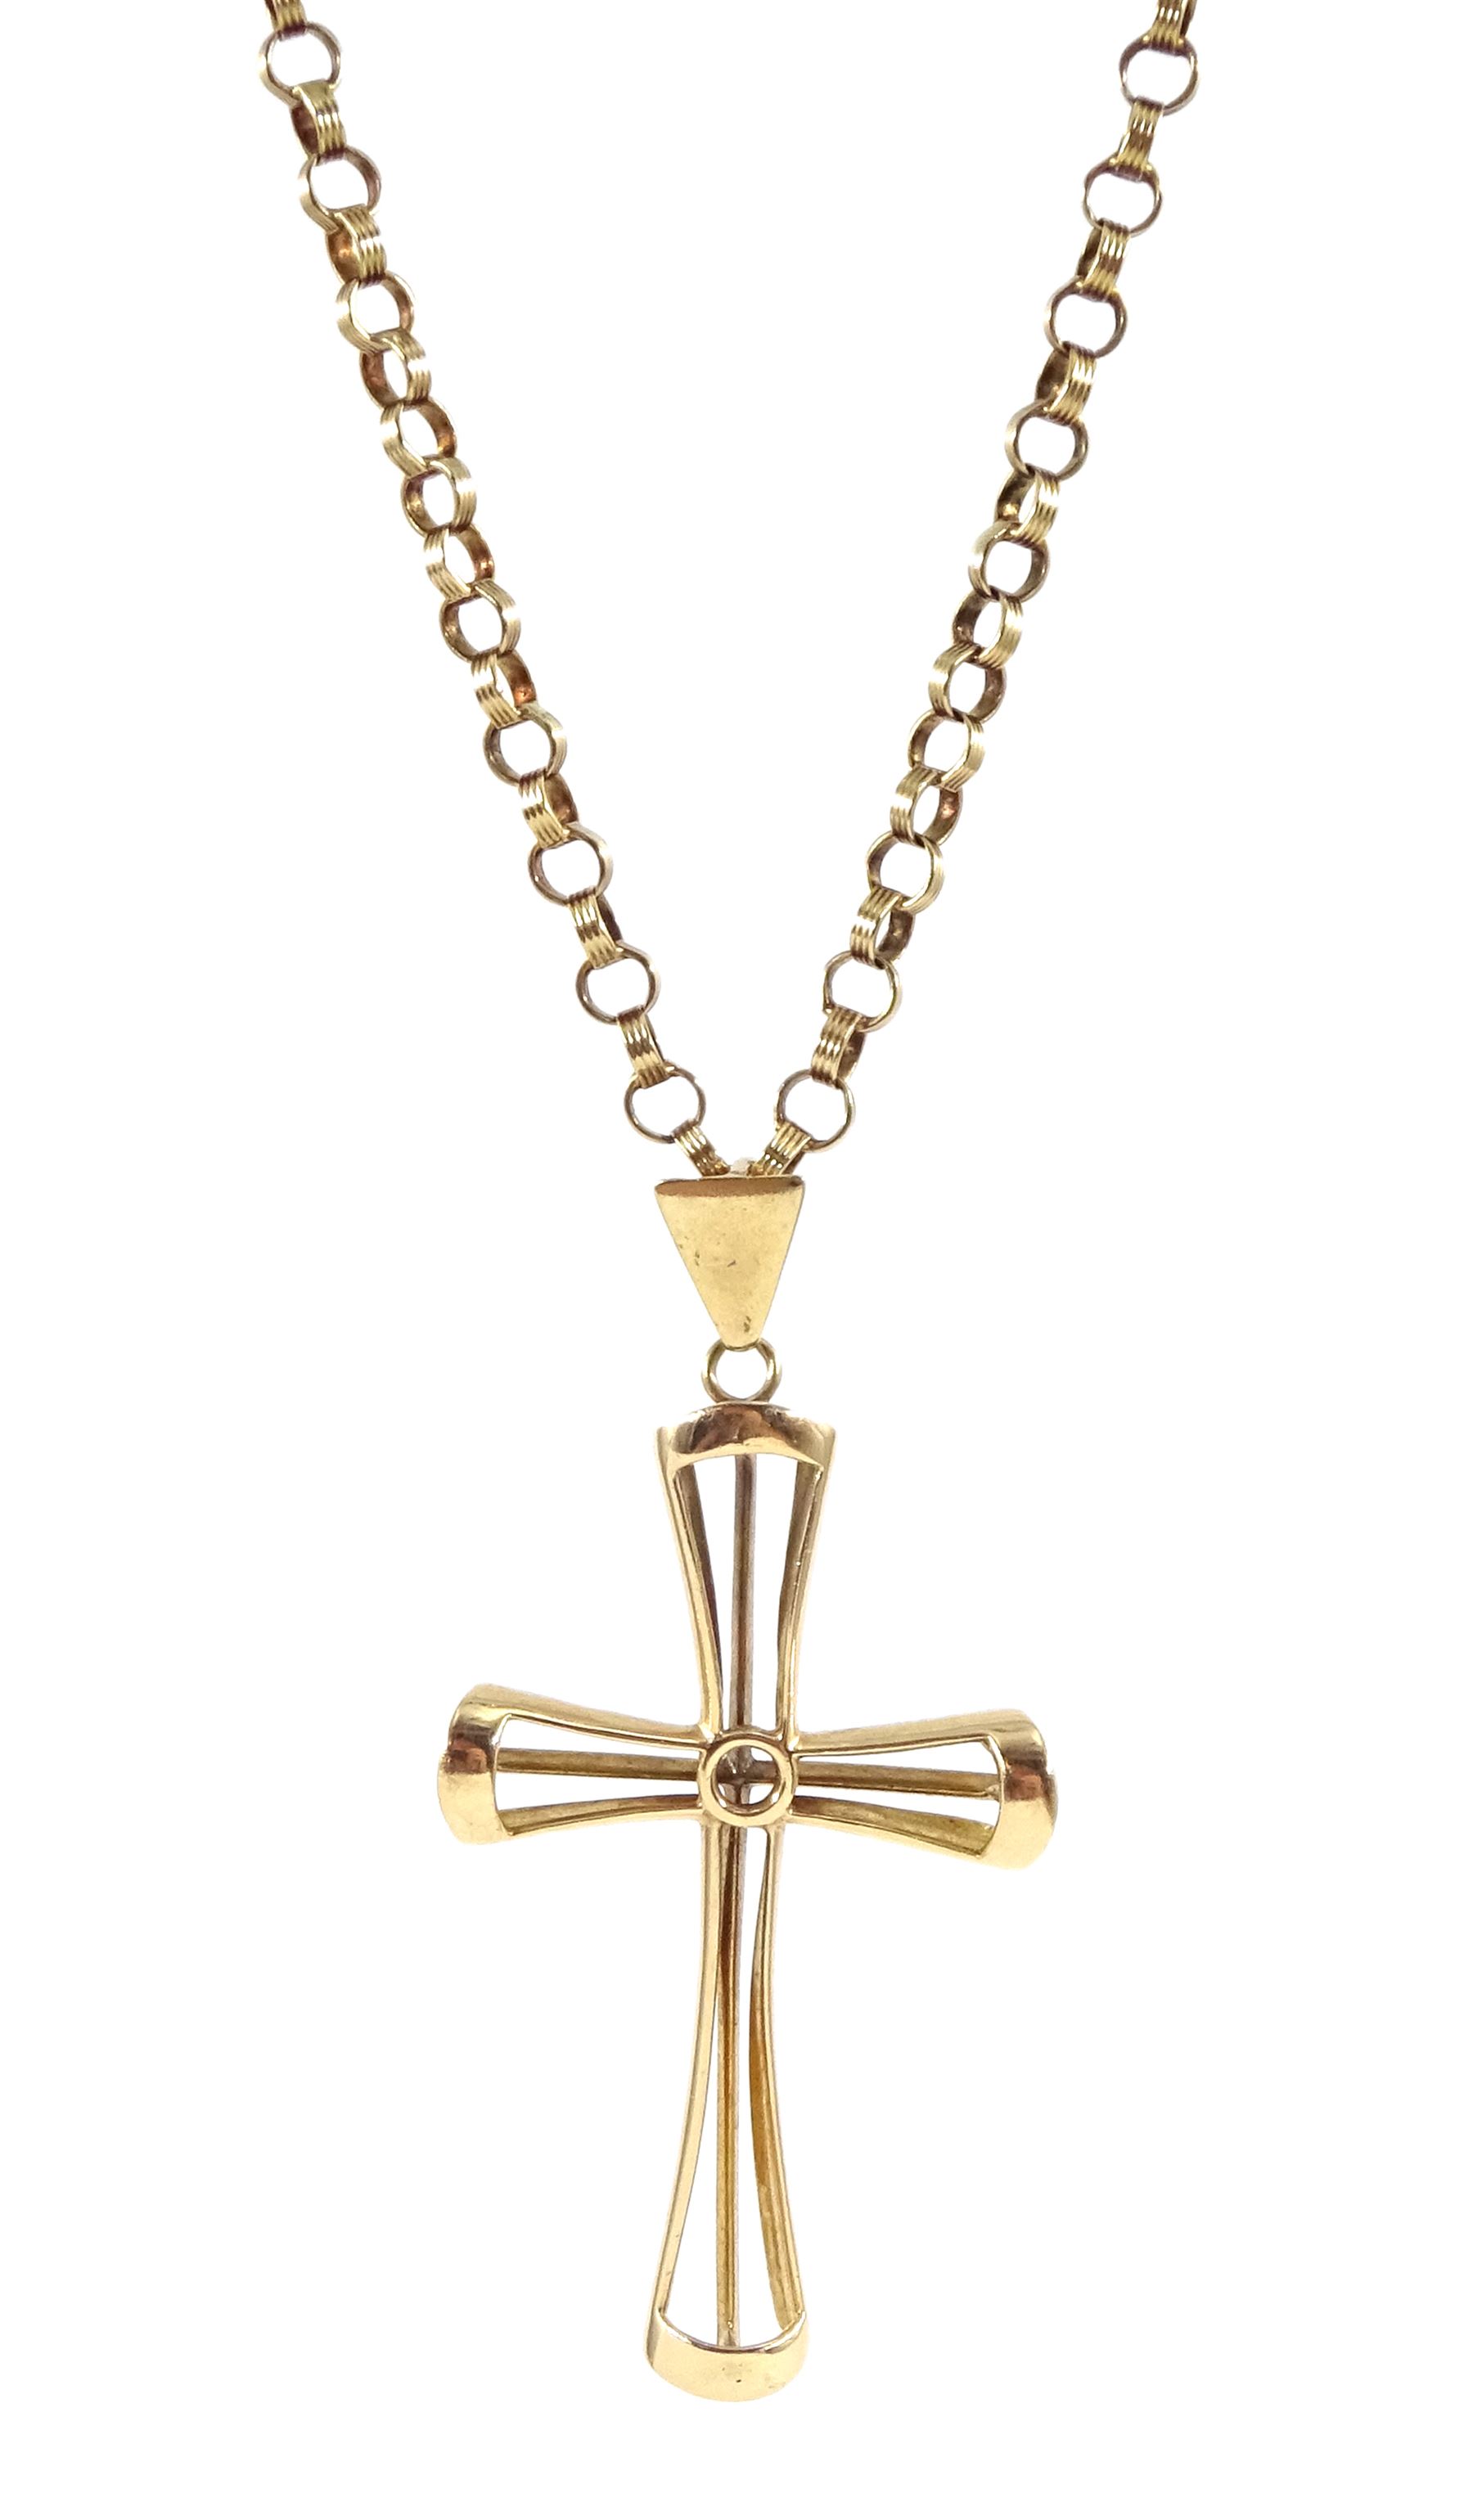 9ct gold cross pendant on 9ct gold belcher link necklace, hallmarked ...